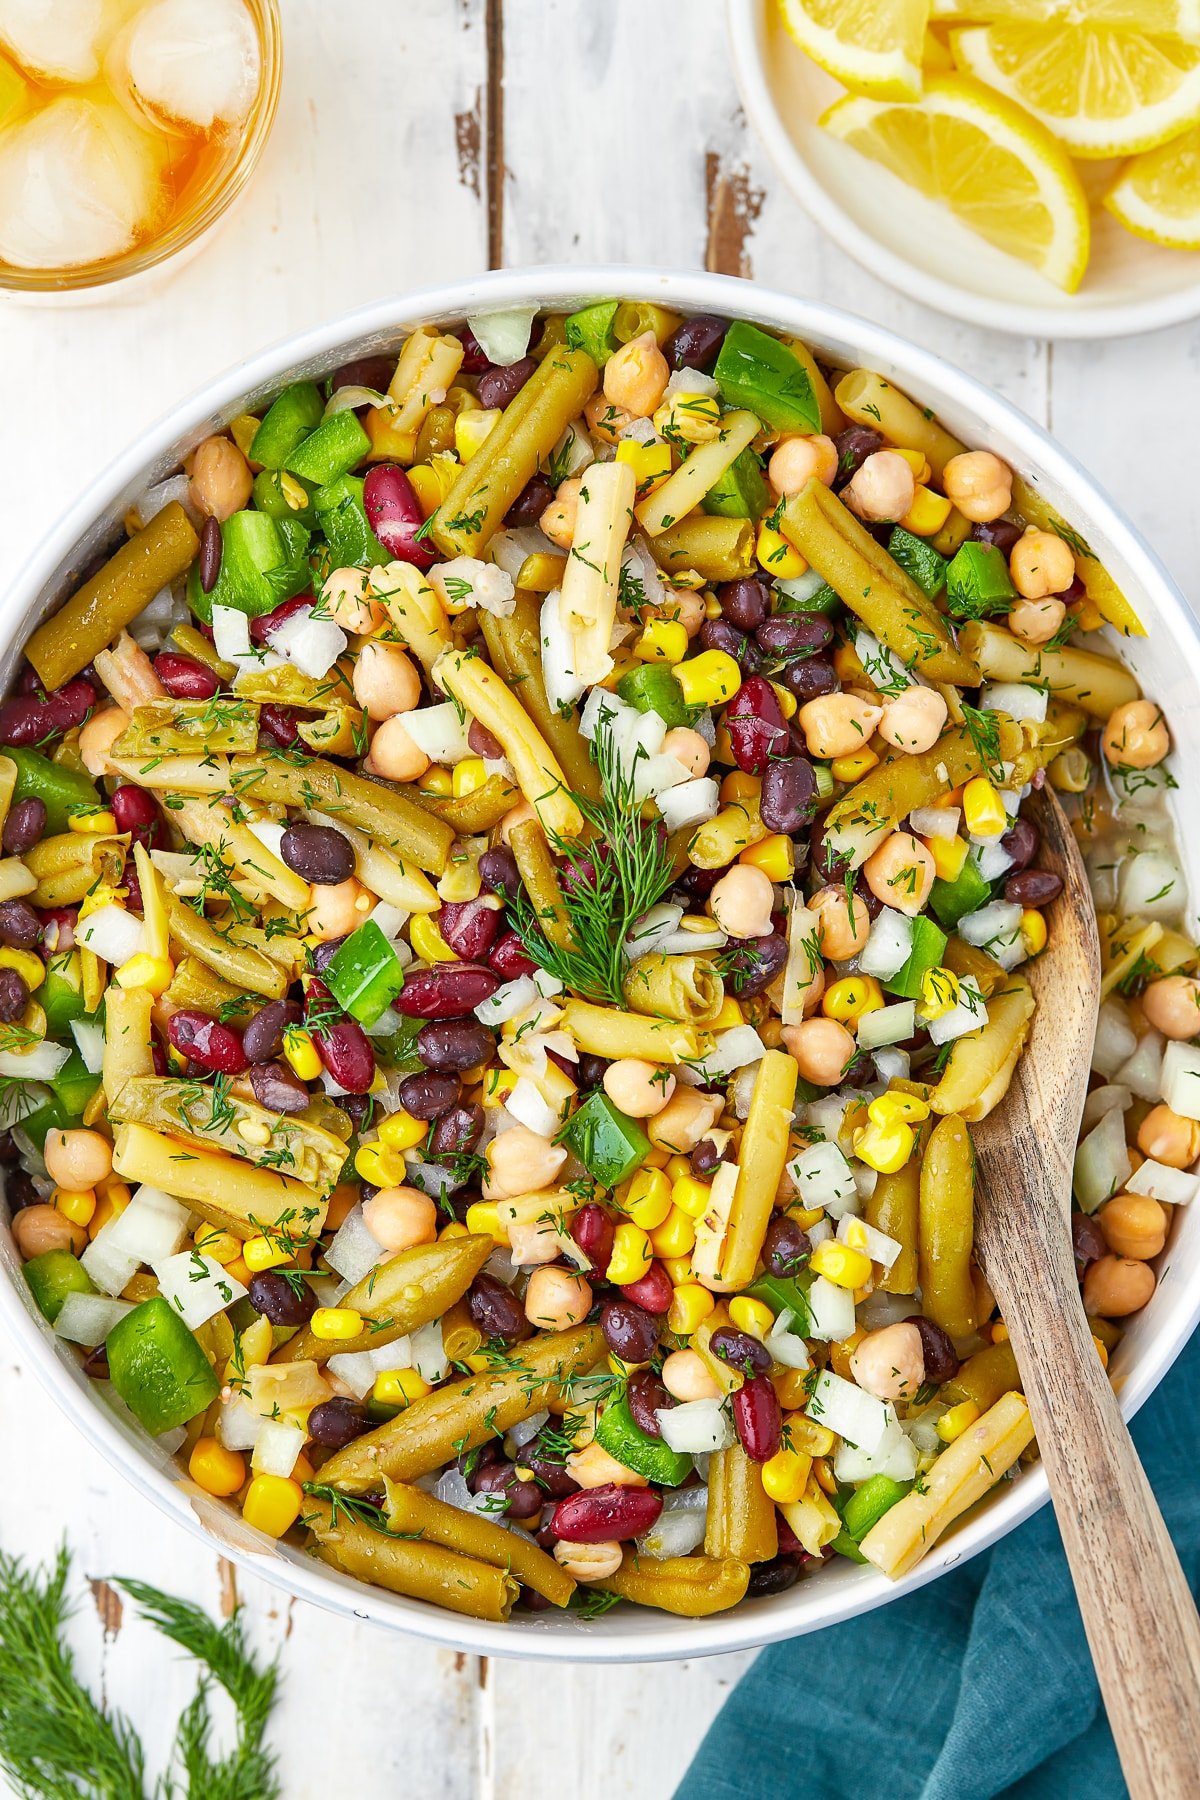 Overhead image of 5 bean salad in a white bowl with wooden spoon